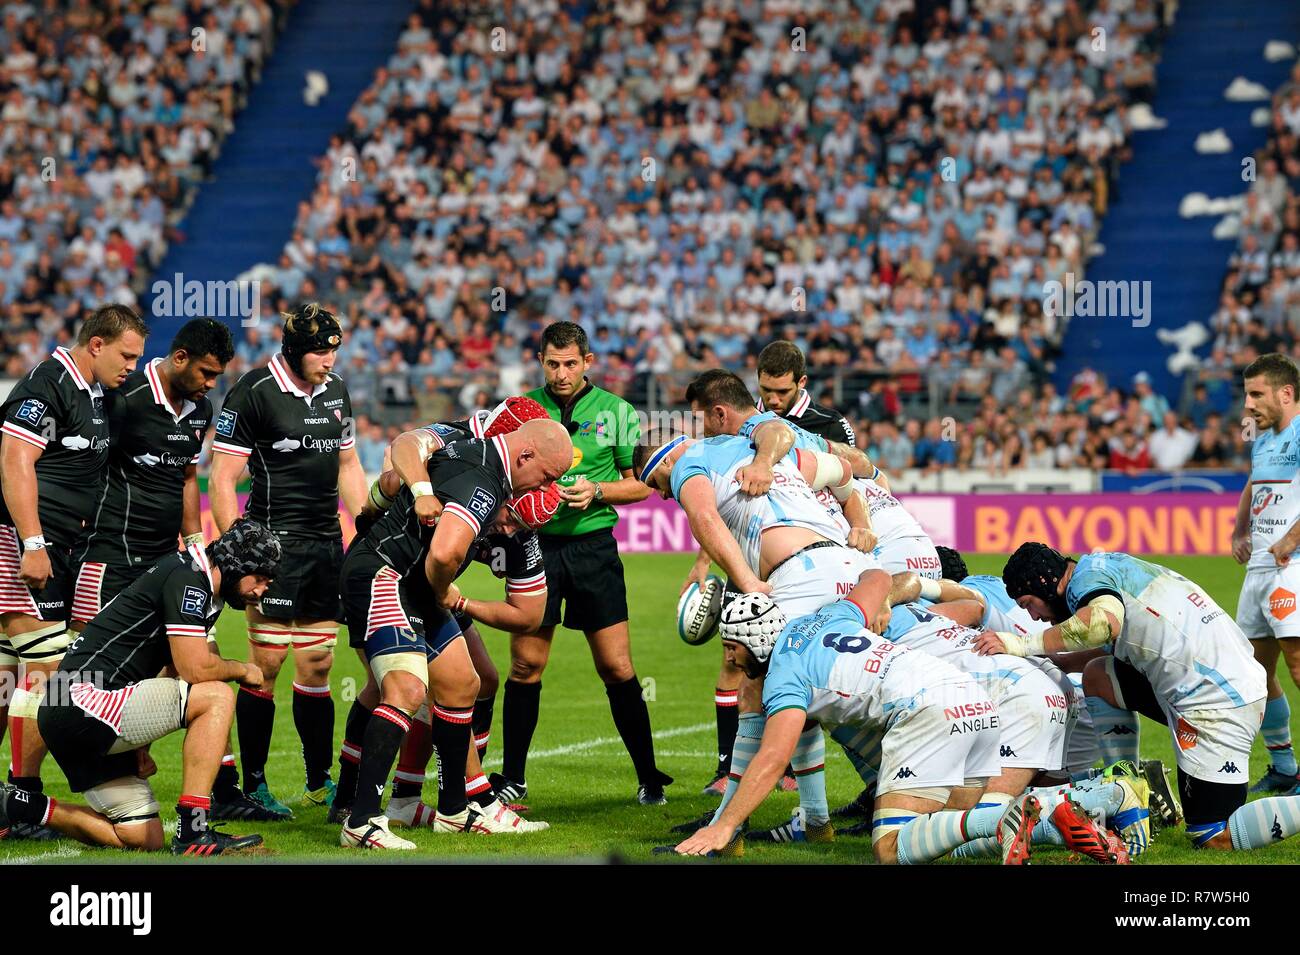 France, Pyrenees Atlantiques, Basque Country, Bayonne, Jean-Dauger stadium,  rugby Basque derby between Aviron Bayonnais (in blue) and Biarritz Olympique  (here in black Stock Photo - Alamy